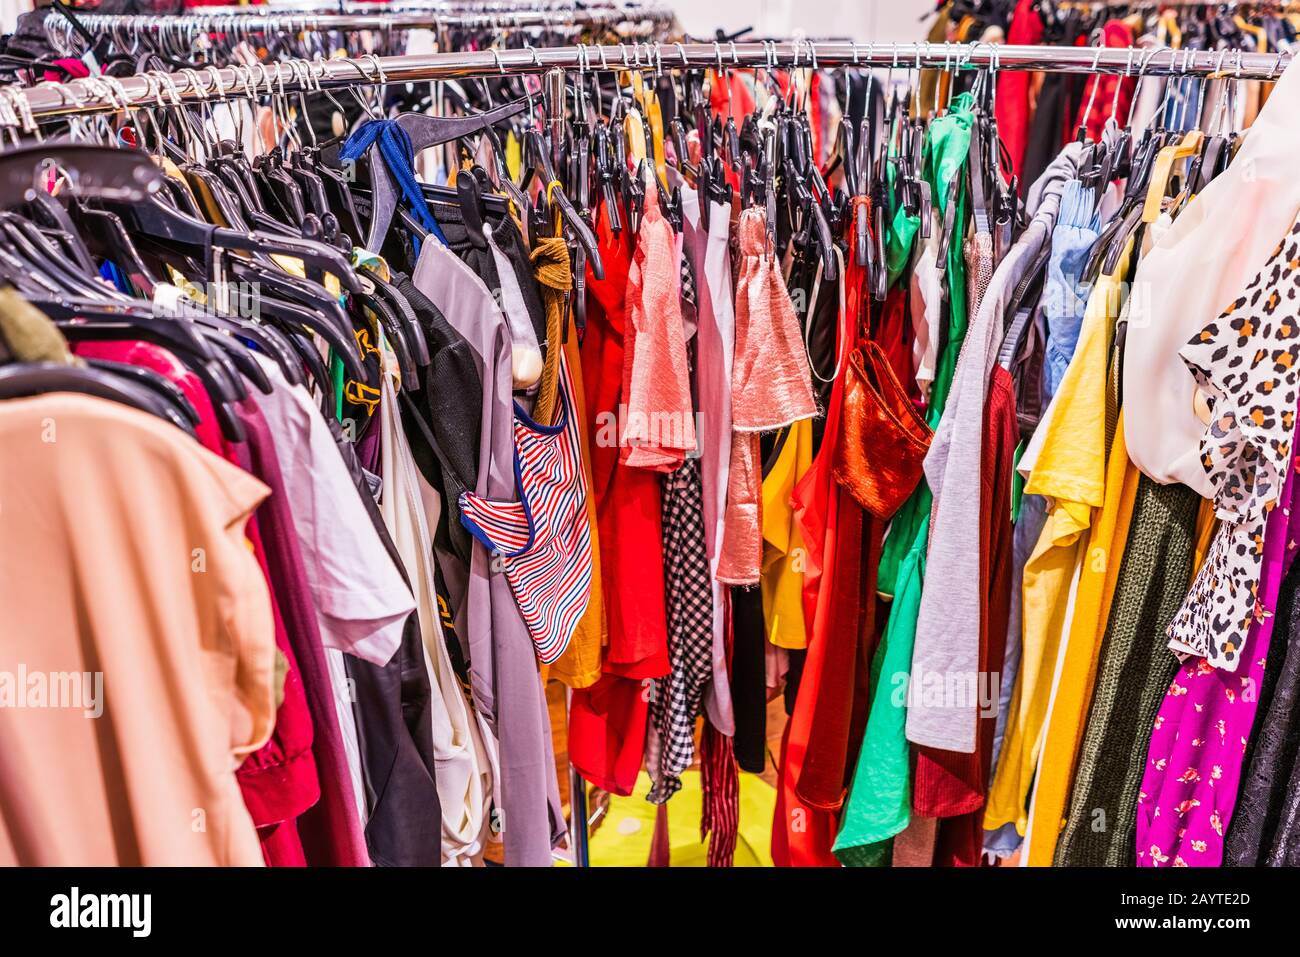 Crowded clearance section in a clothing store, with various colorful garments placed tightly on racks in no particular order; fast fashion concept Stock Photo